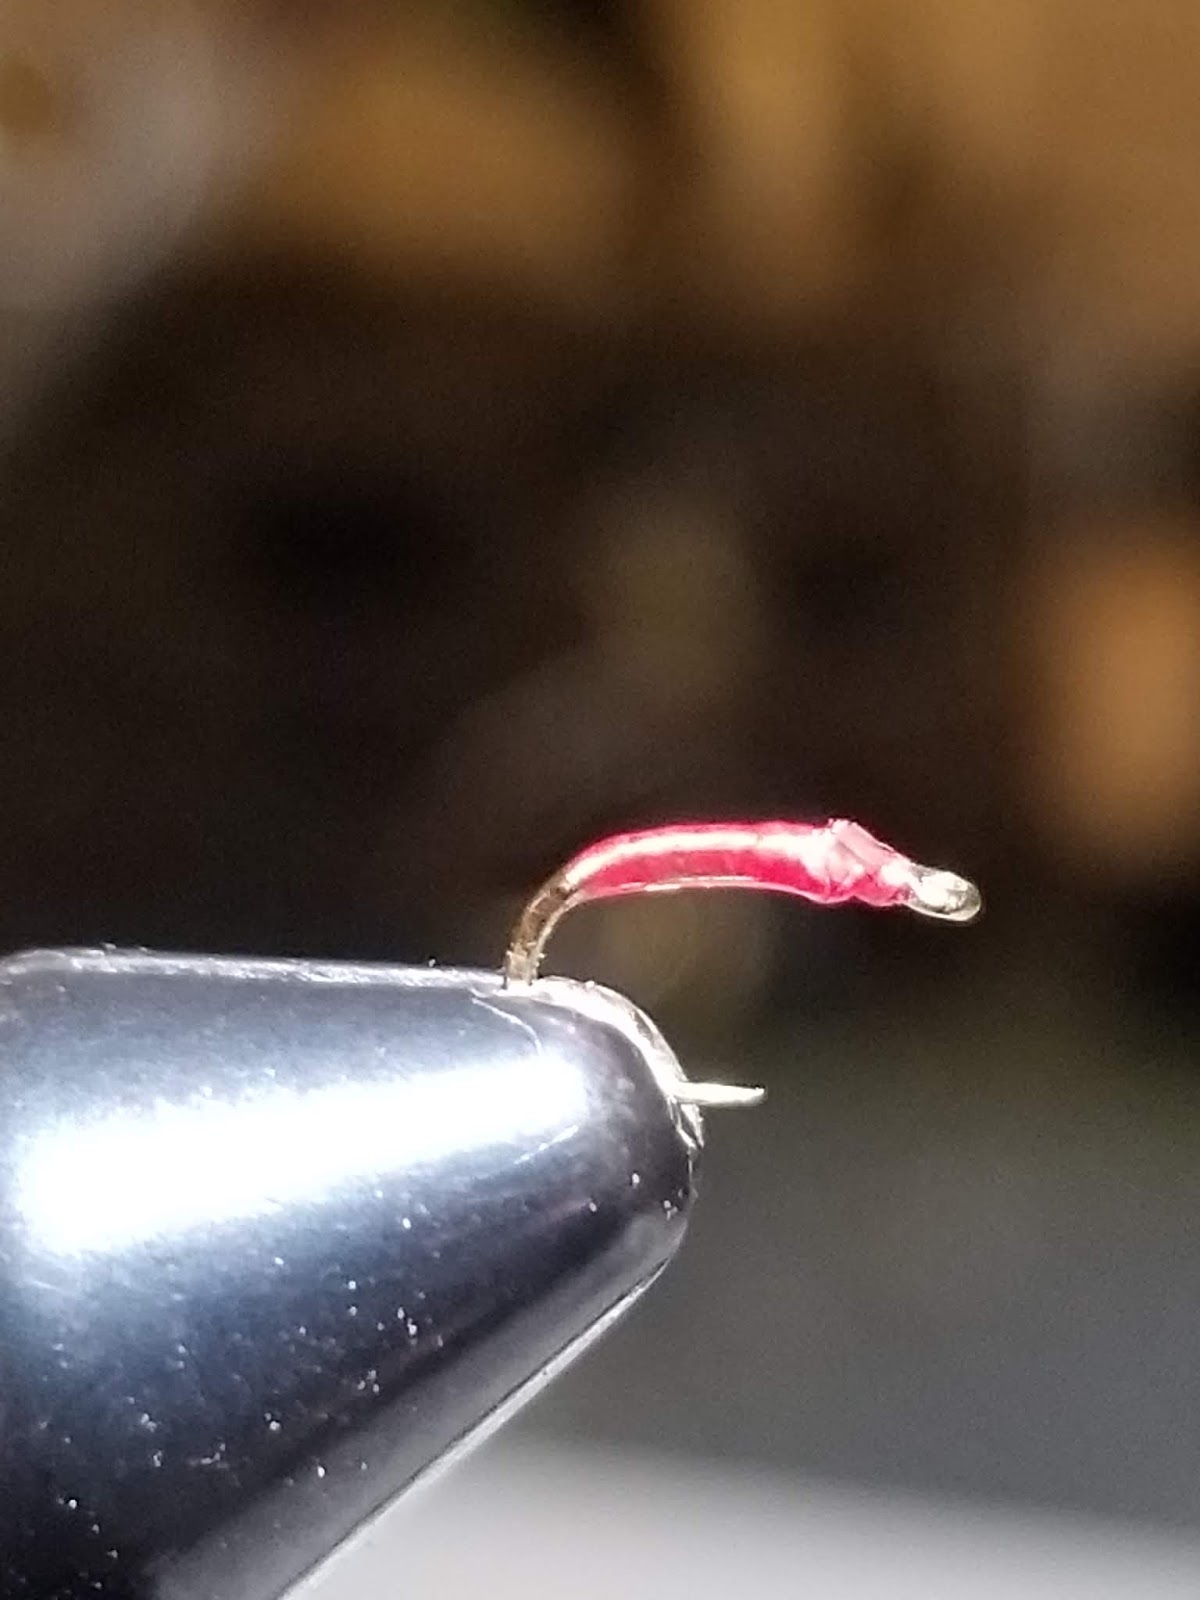 Welcome to the Millers River Fly Fishing Forum : The EB, The Swift, Blood  Worms